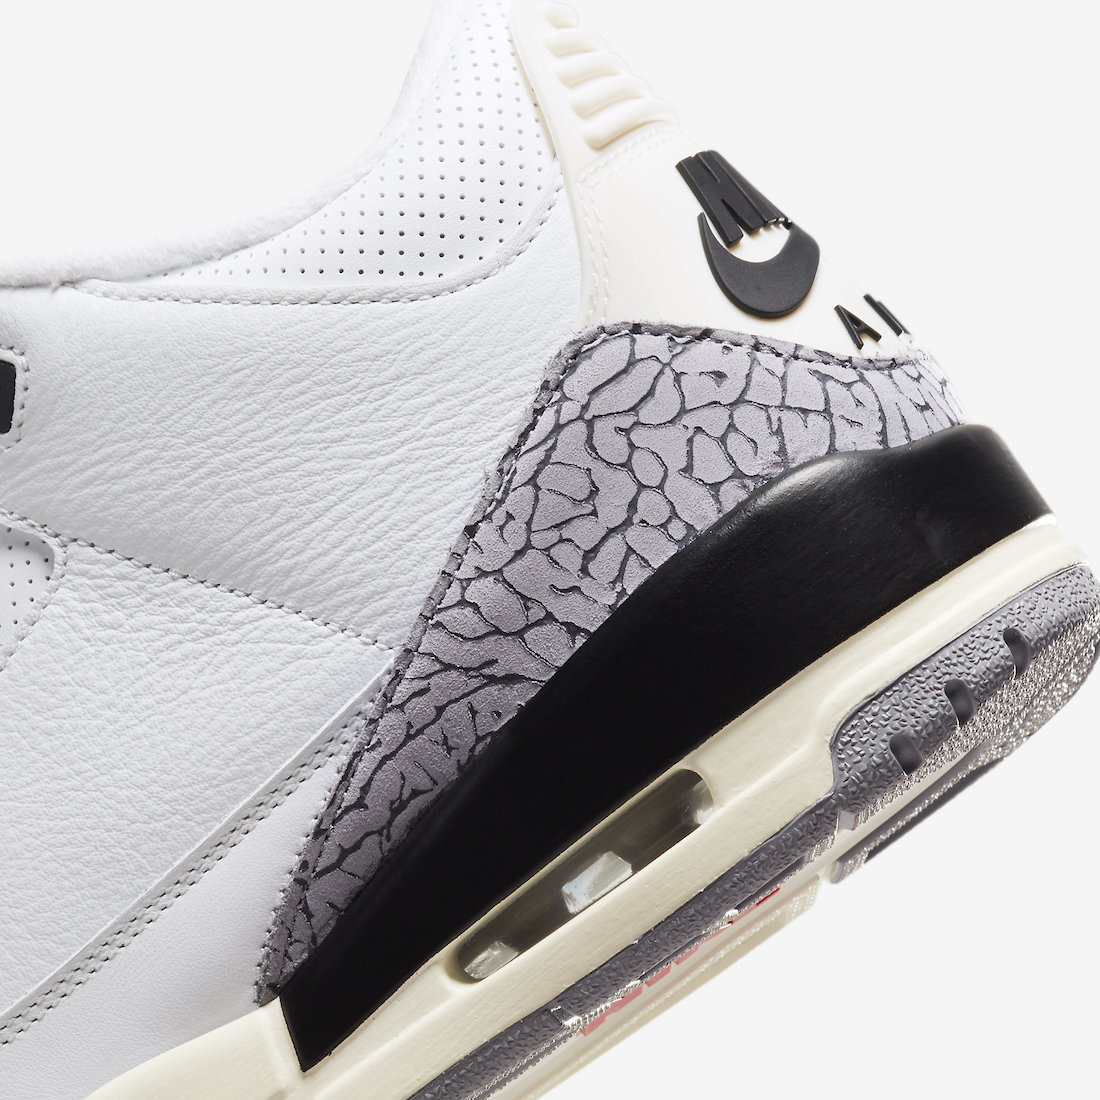 Where To Buy The Air Jordan 3 “White Cement Reimagined”